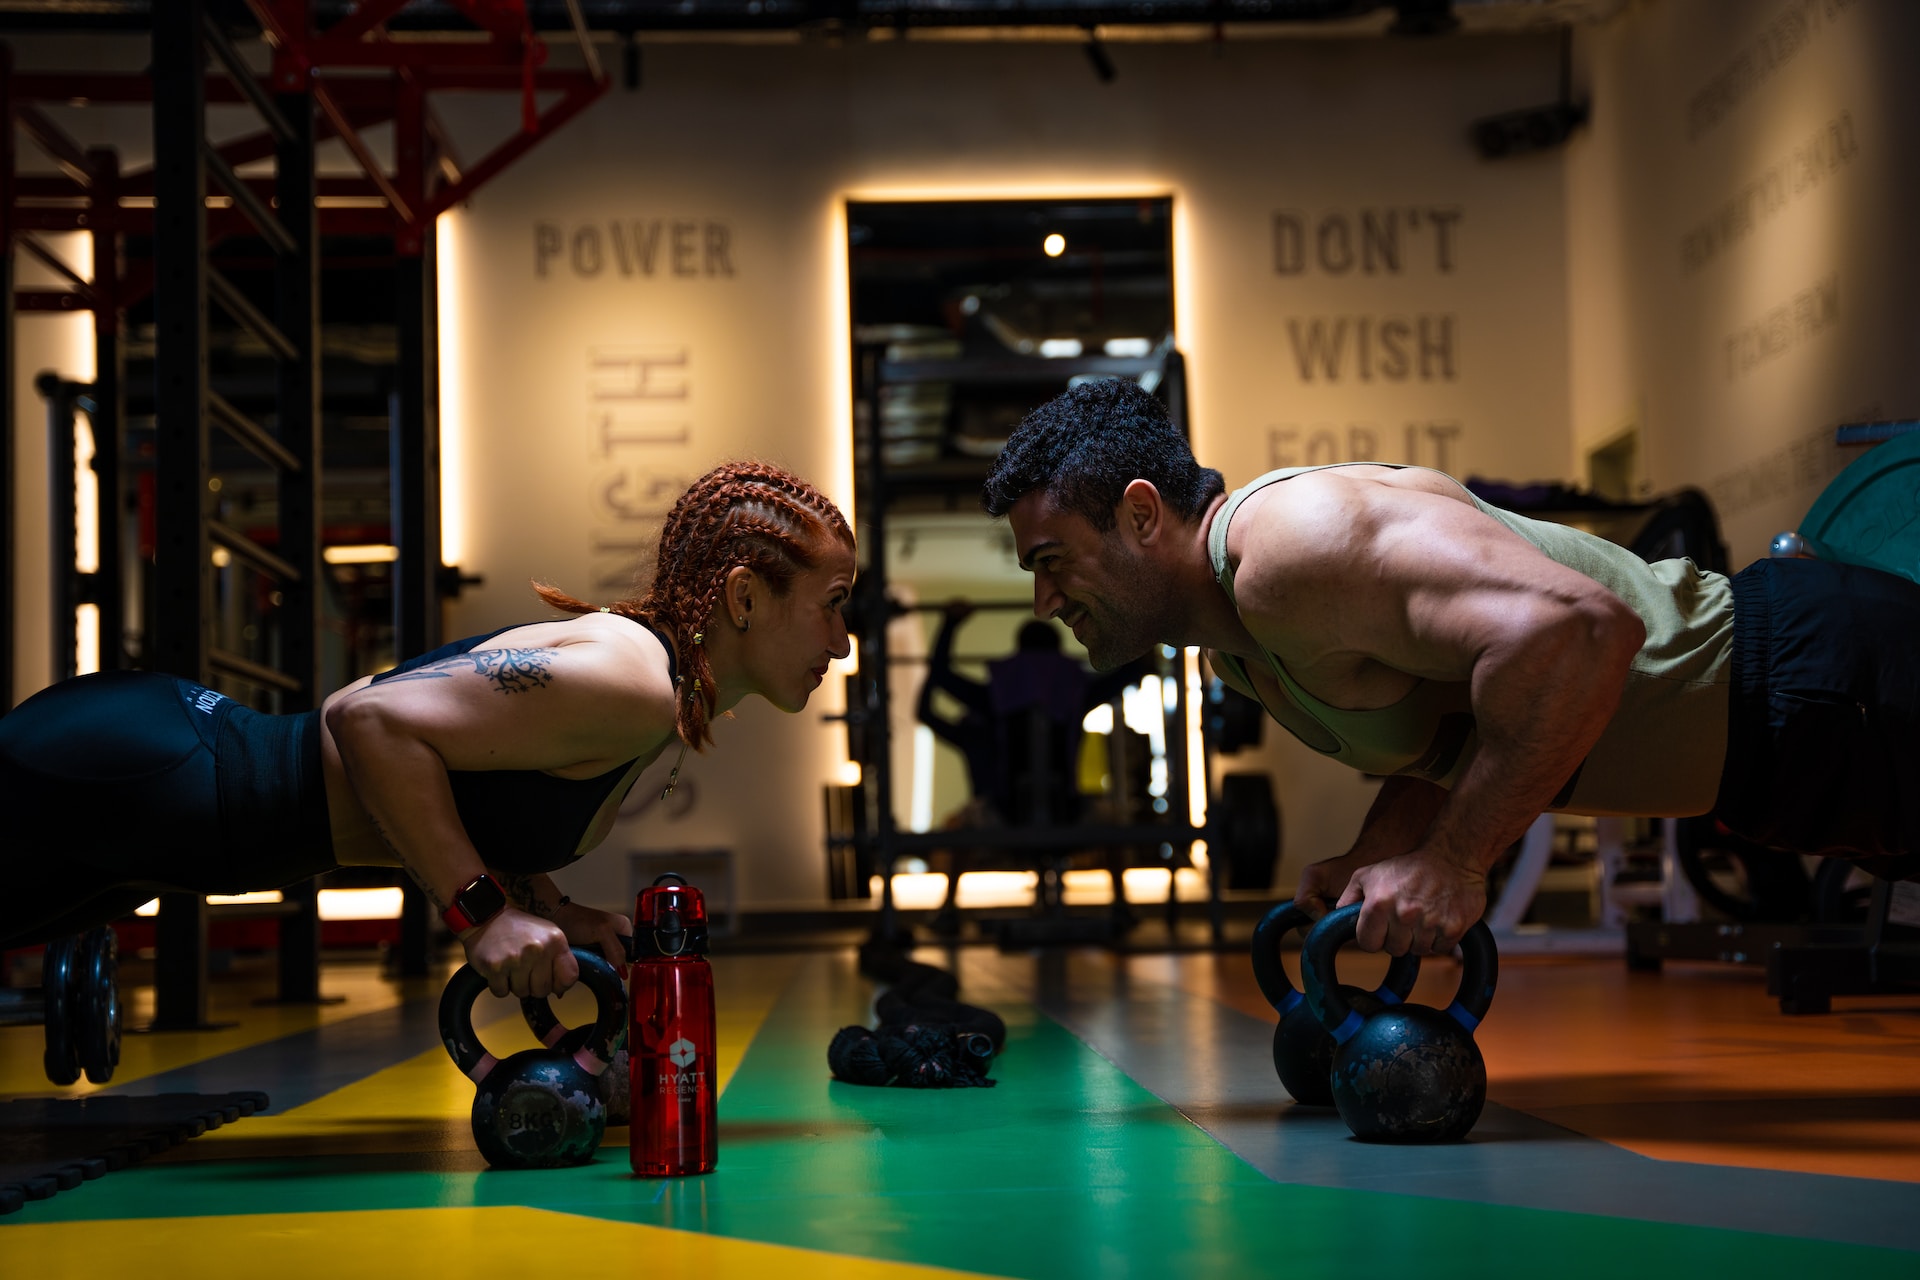 the image shows a female and a male athletes standing in the plank on the kettlebells